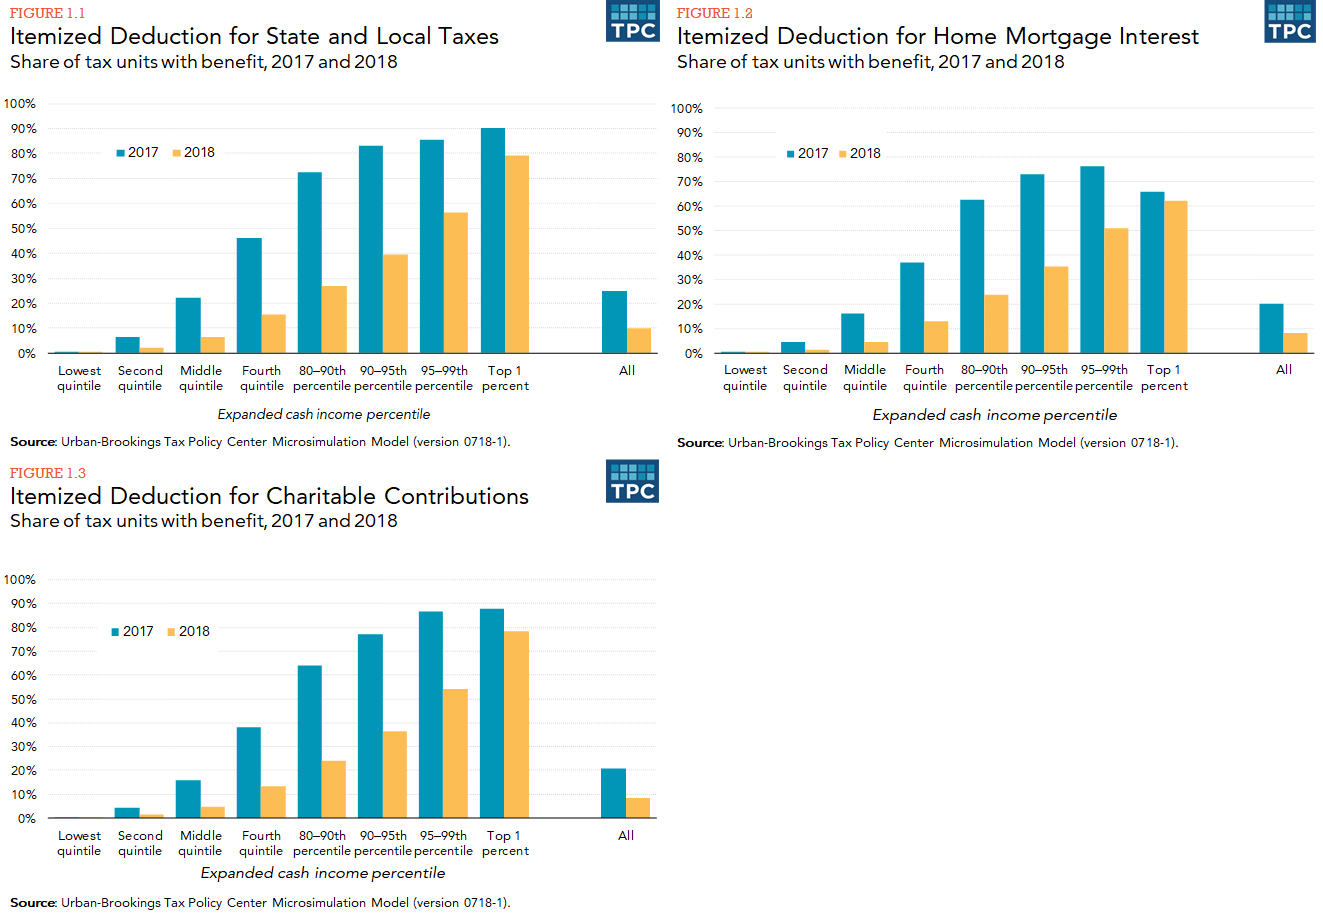 Three-panel bar chart of share of tax units in each income quintile with benefit from selected deductions, comparing 2017 and 2018.